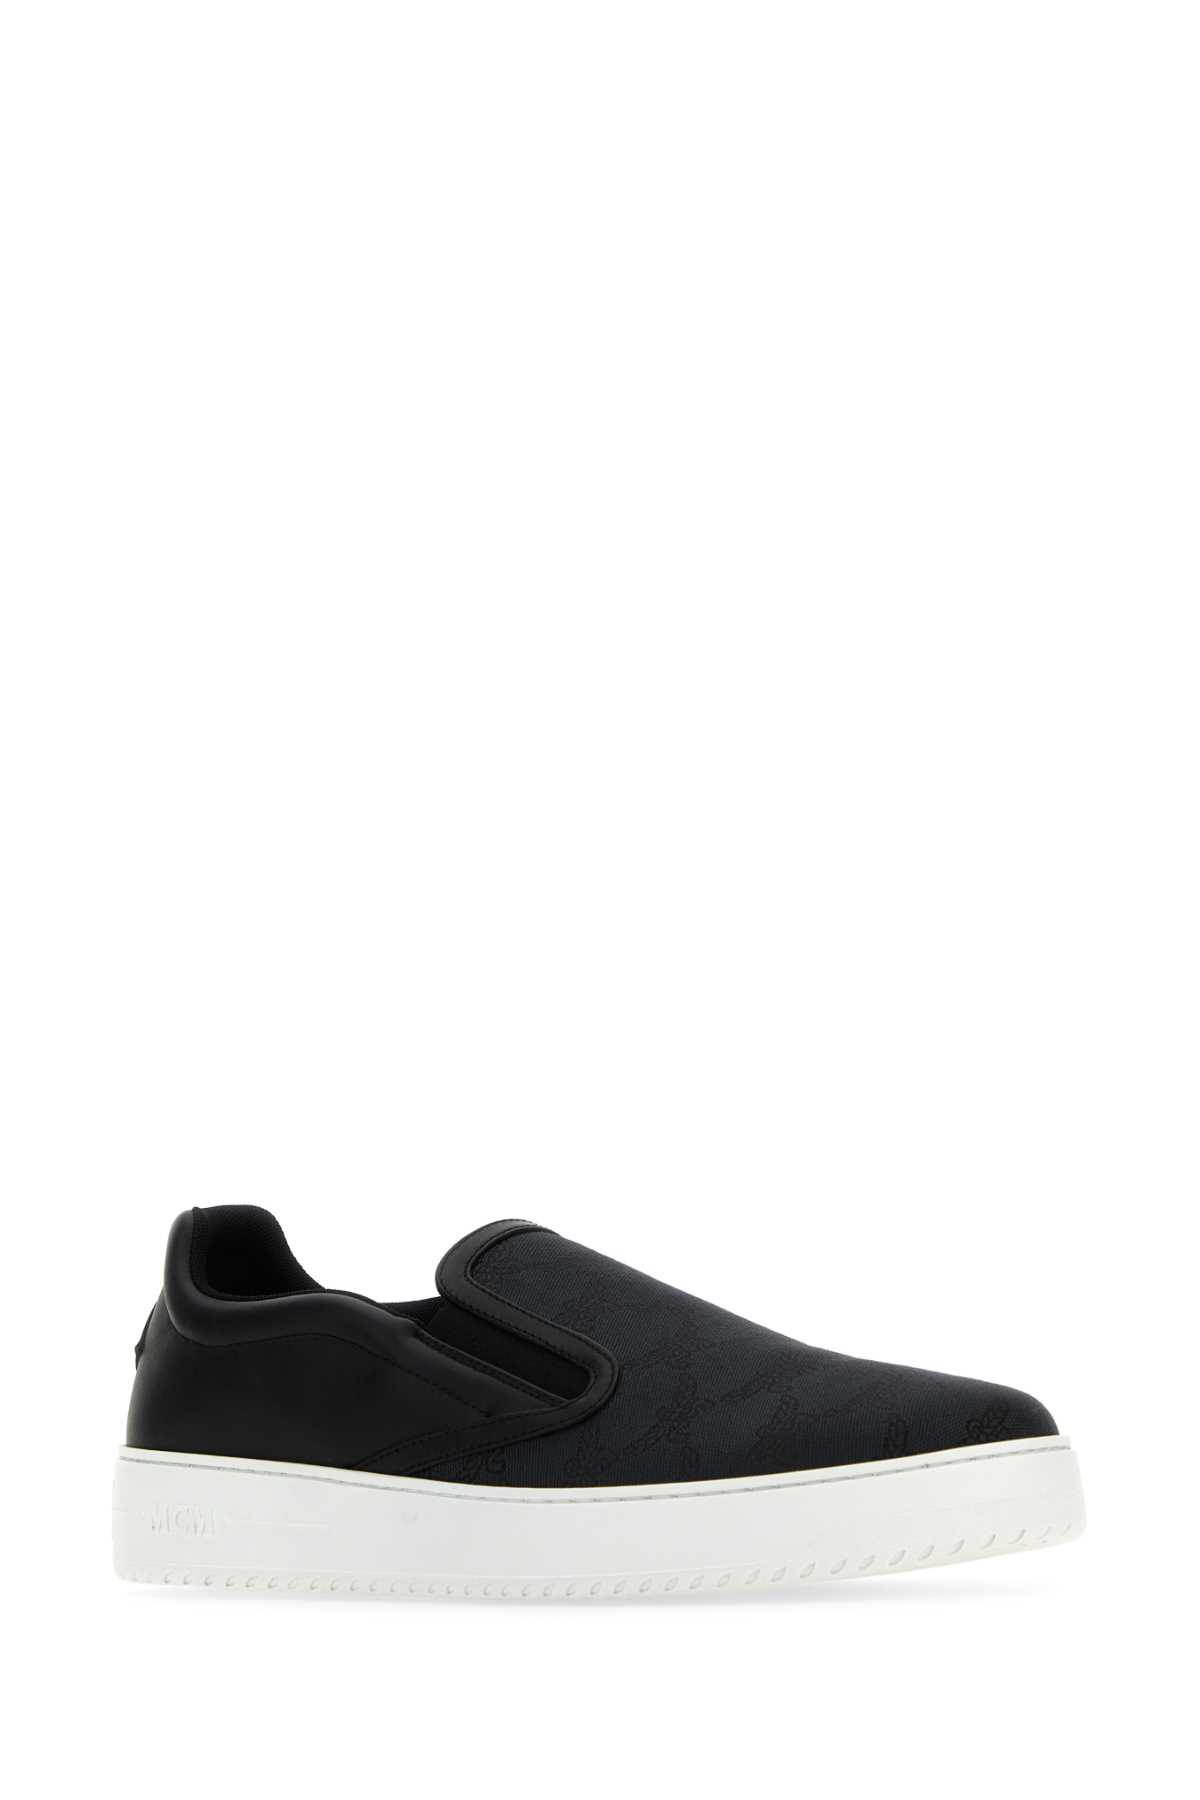 Shop Mcm Black Canvas And Leather Neo Terrain Slip Ons In Darkgrey